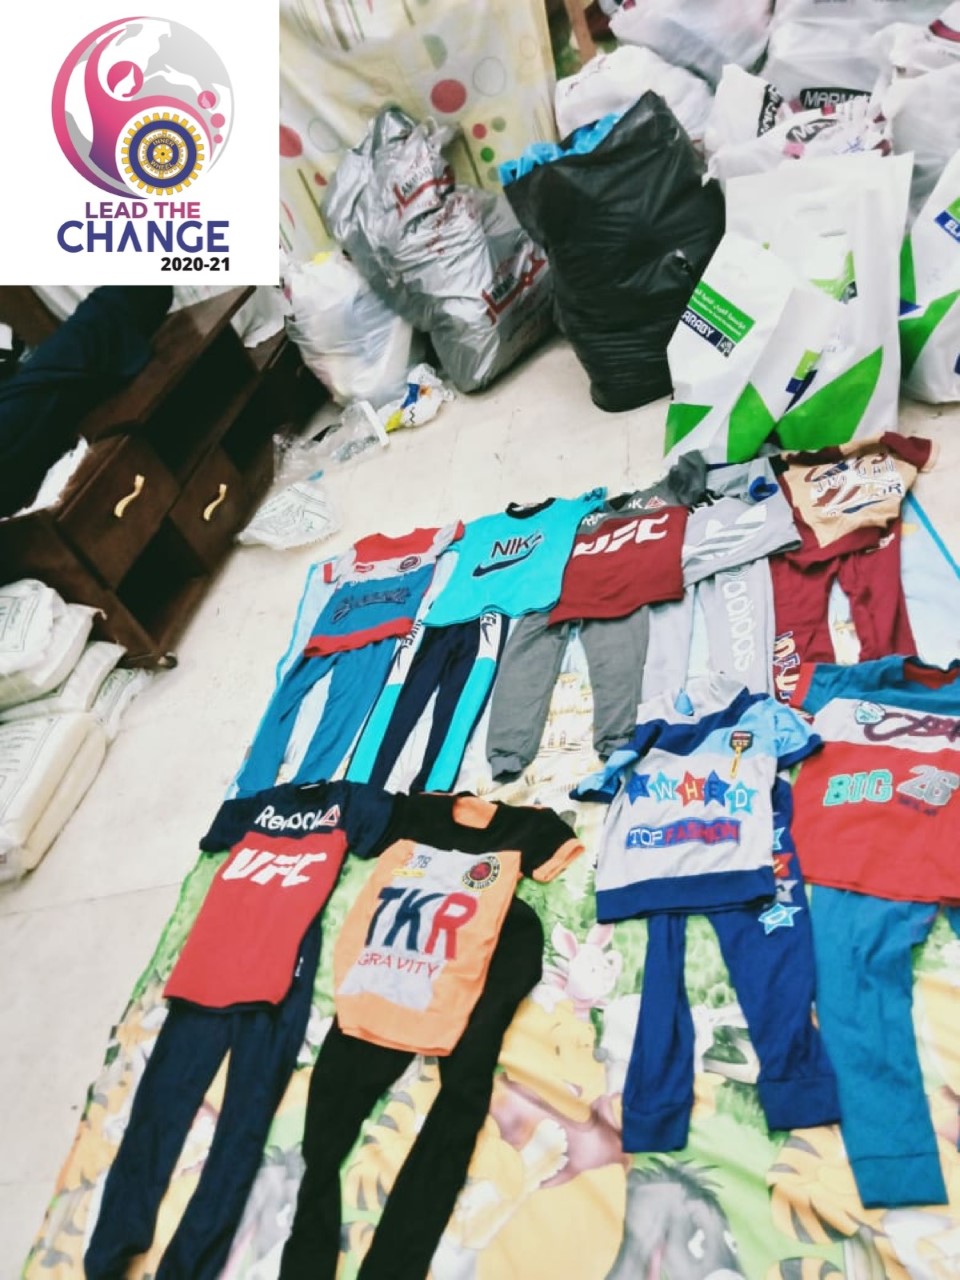 3- The new cloths for the children